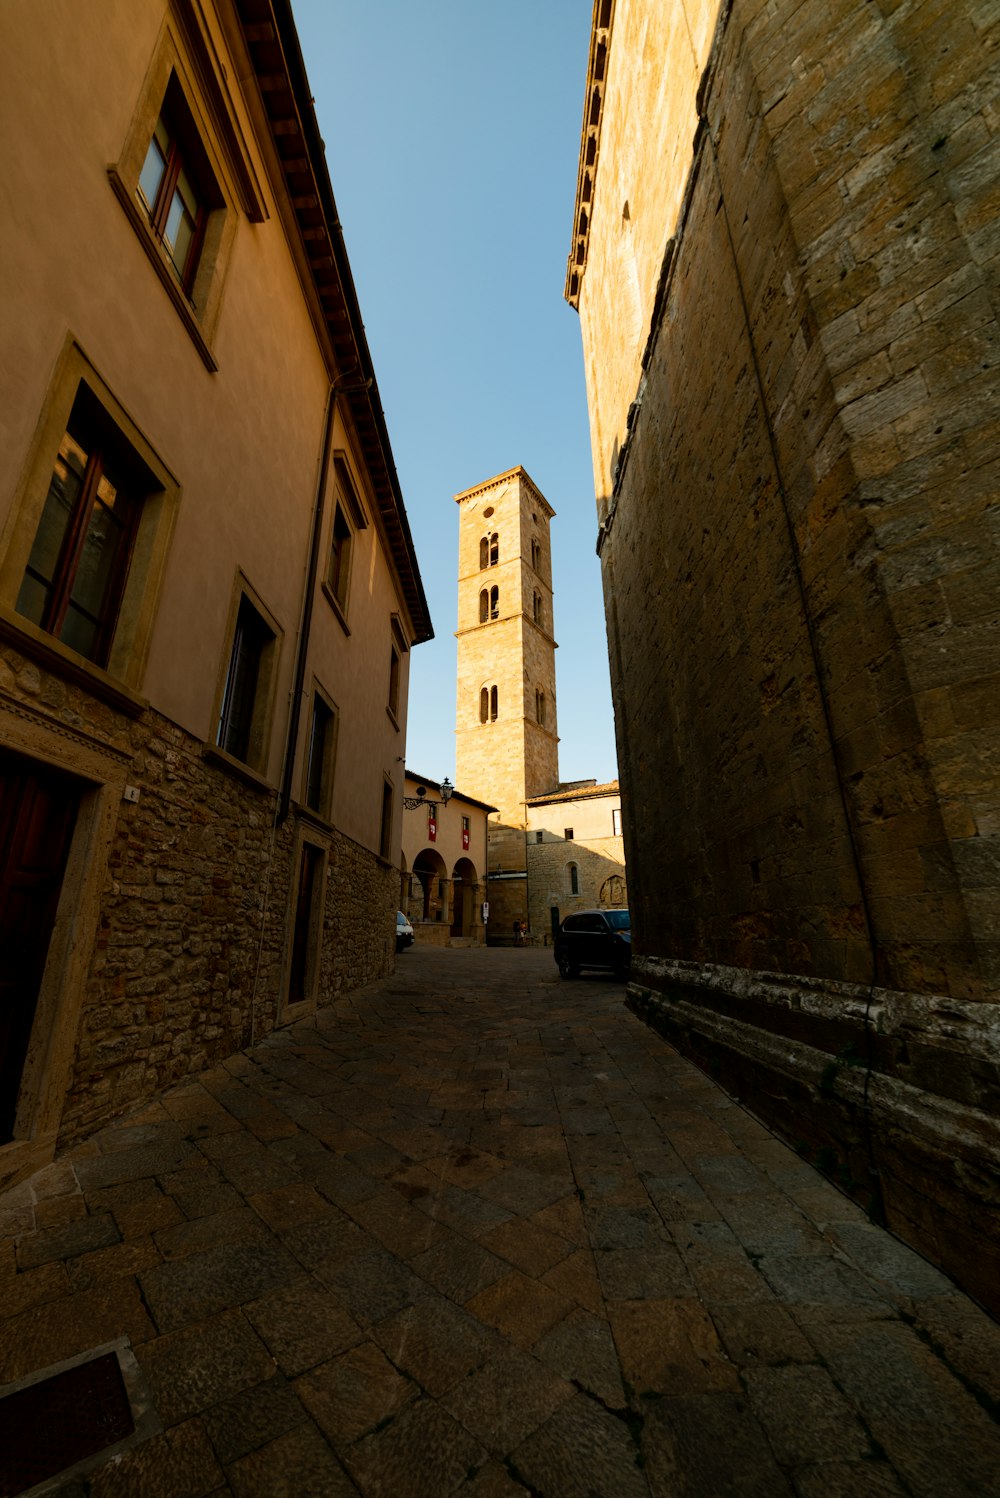 a narrow street with a tall tower in the background